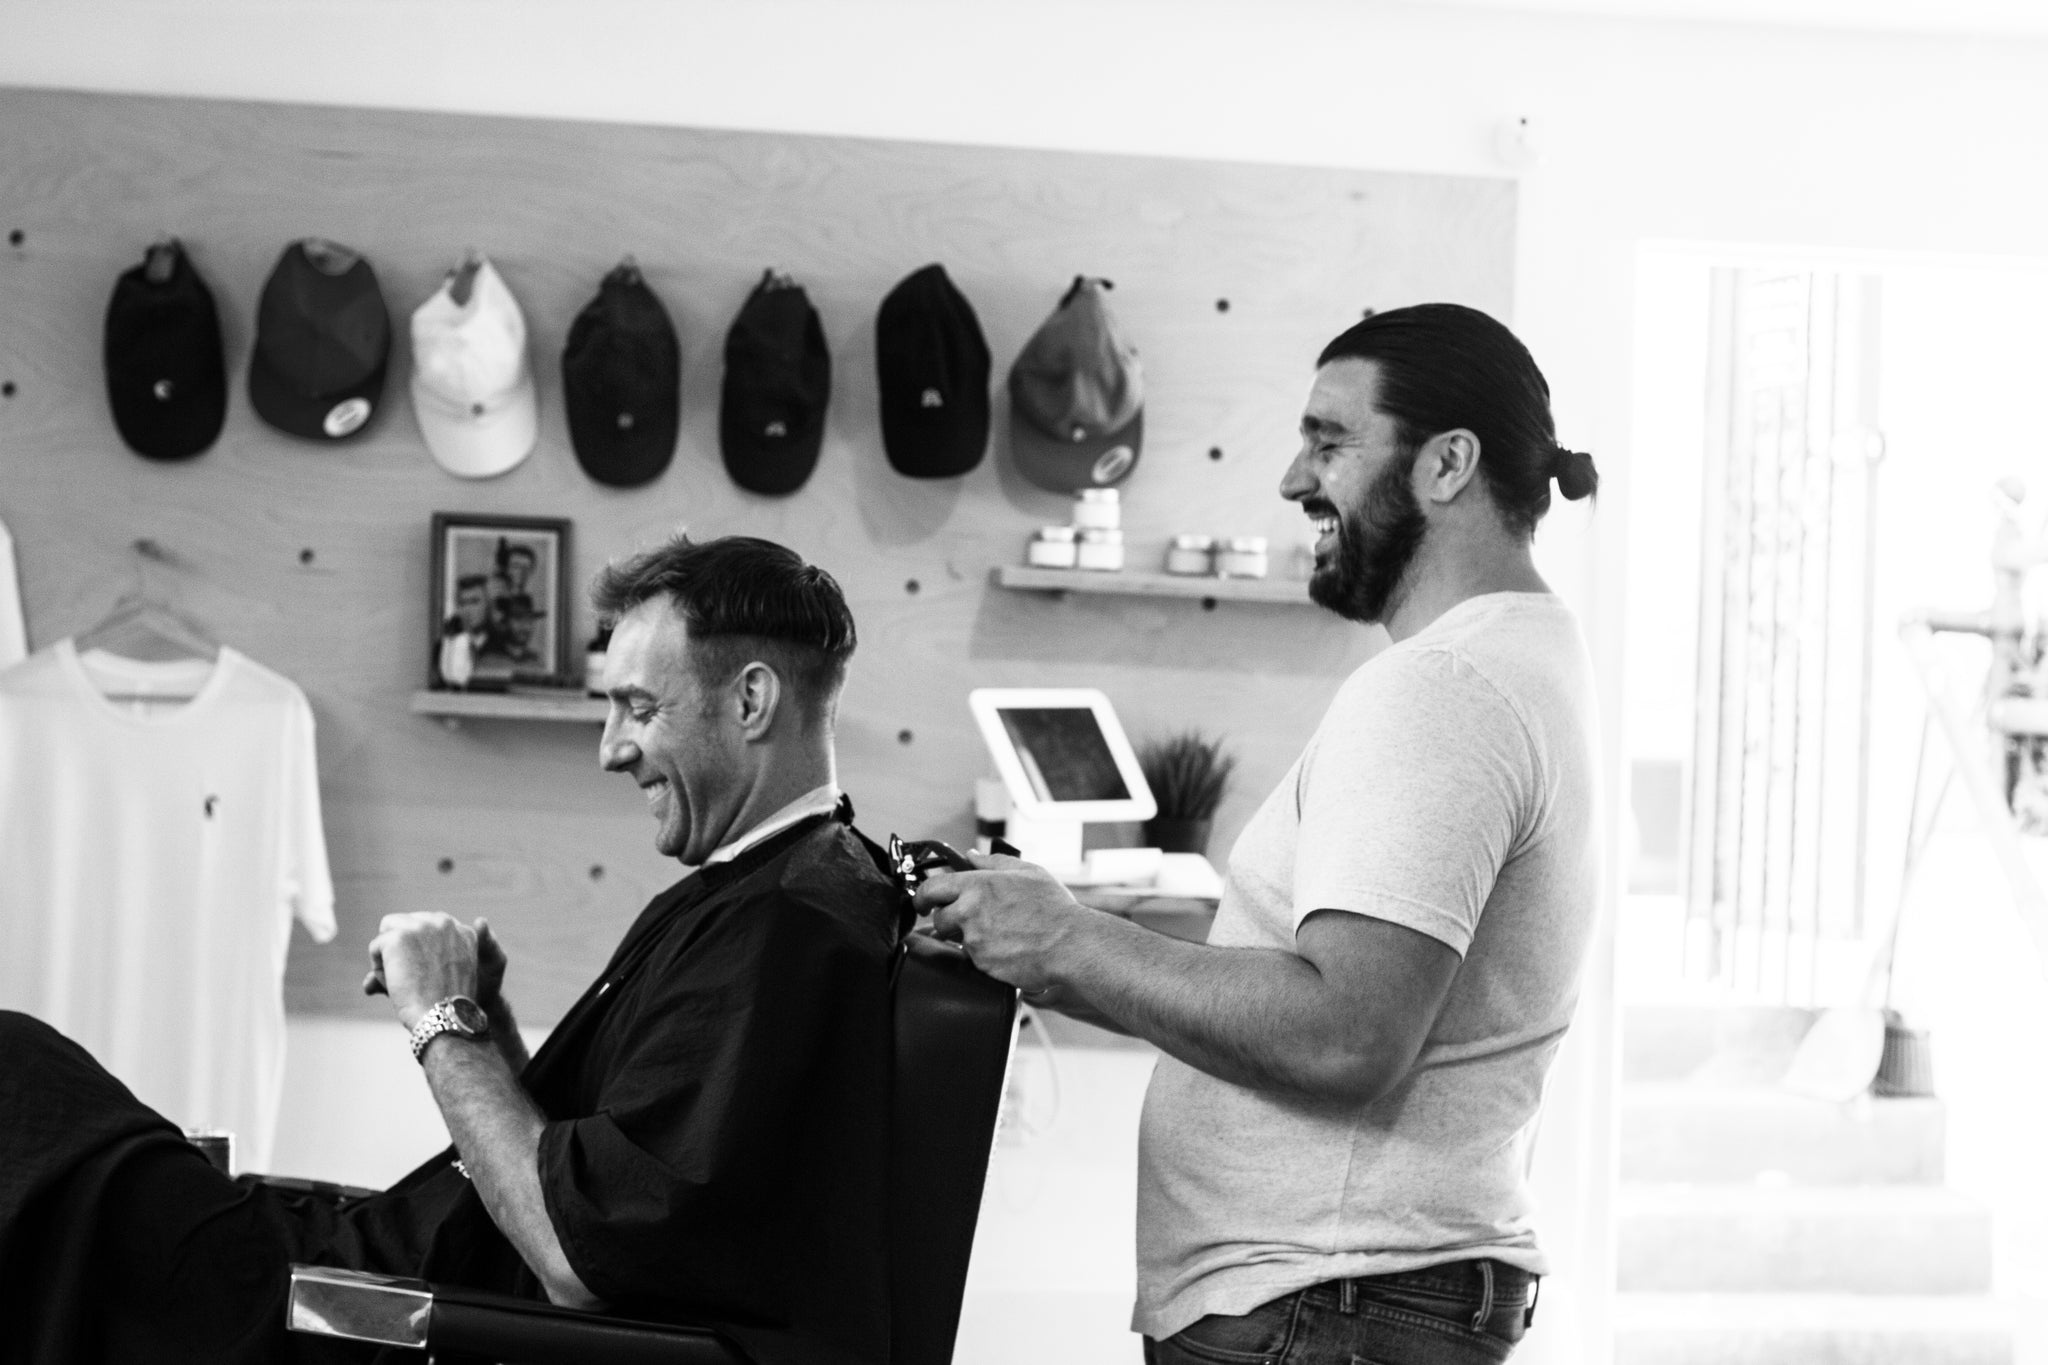 5 Foolproof Steps To Get The Haircut You Want From A New Barber The First Time